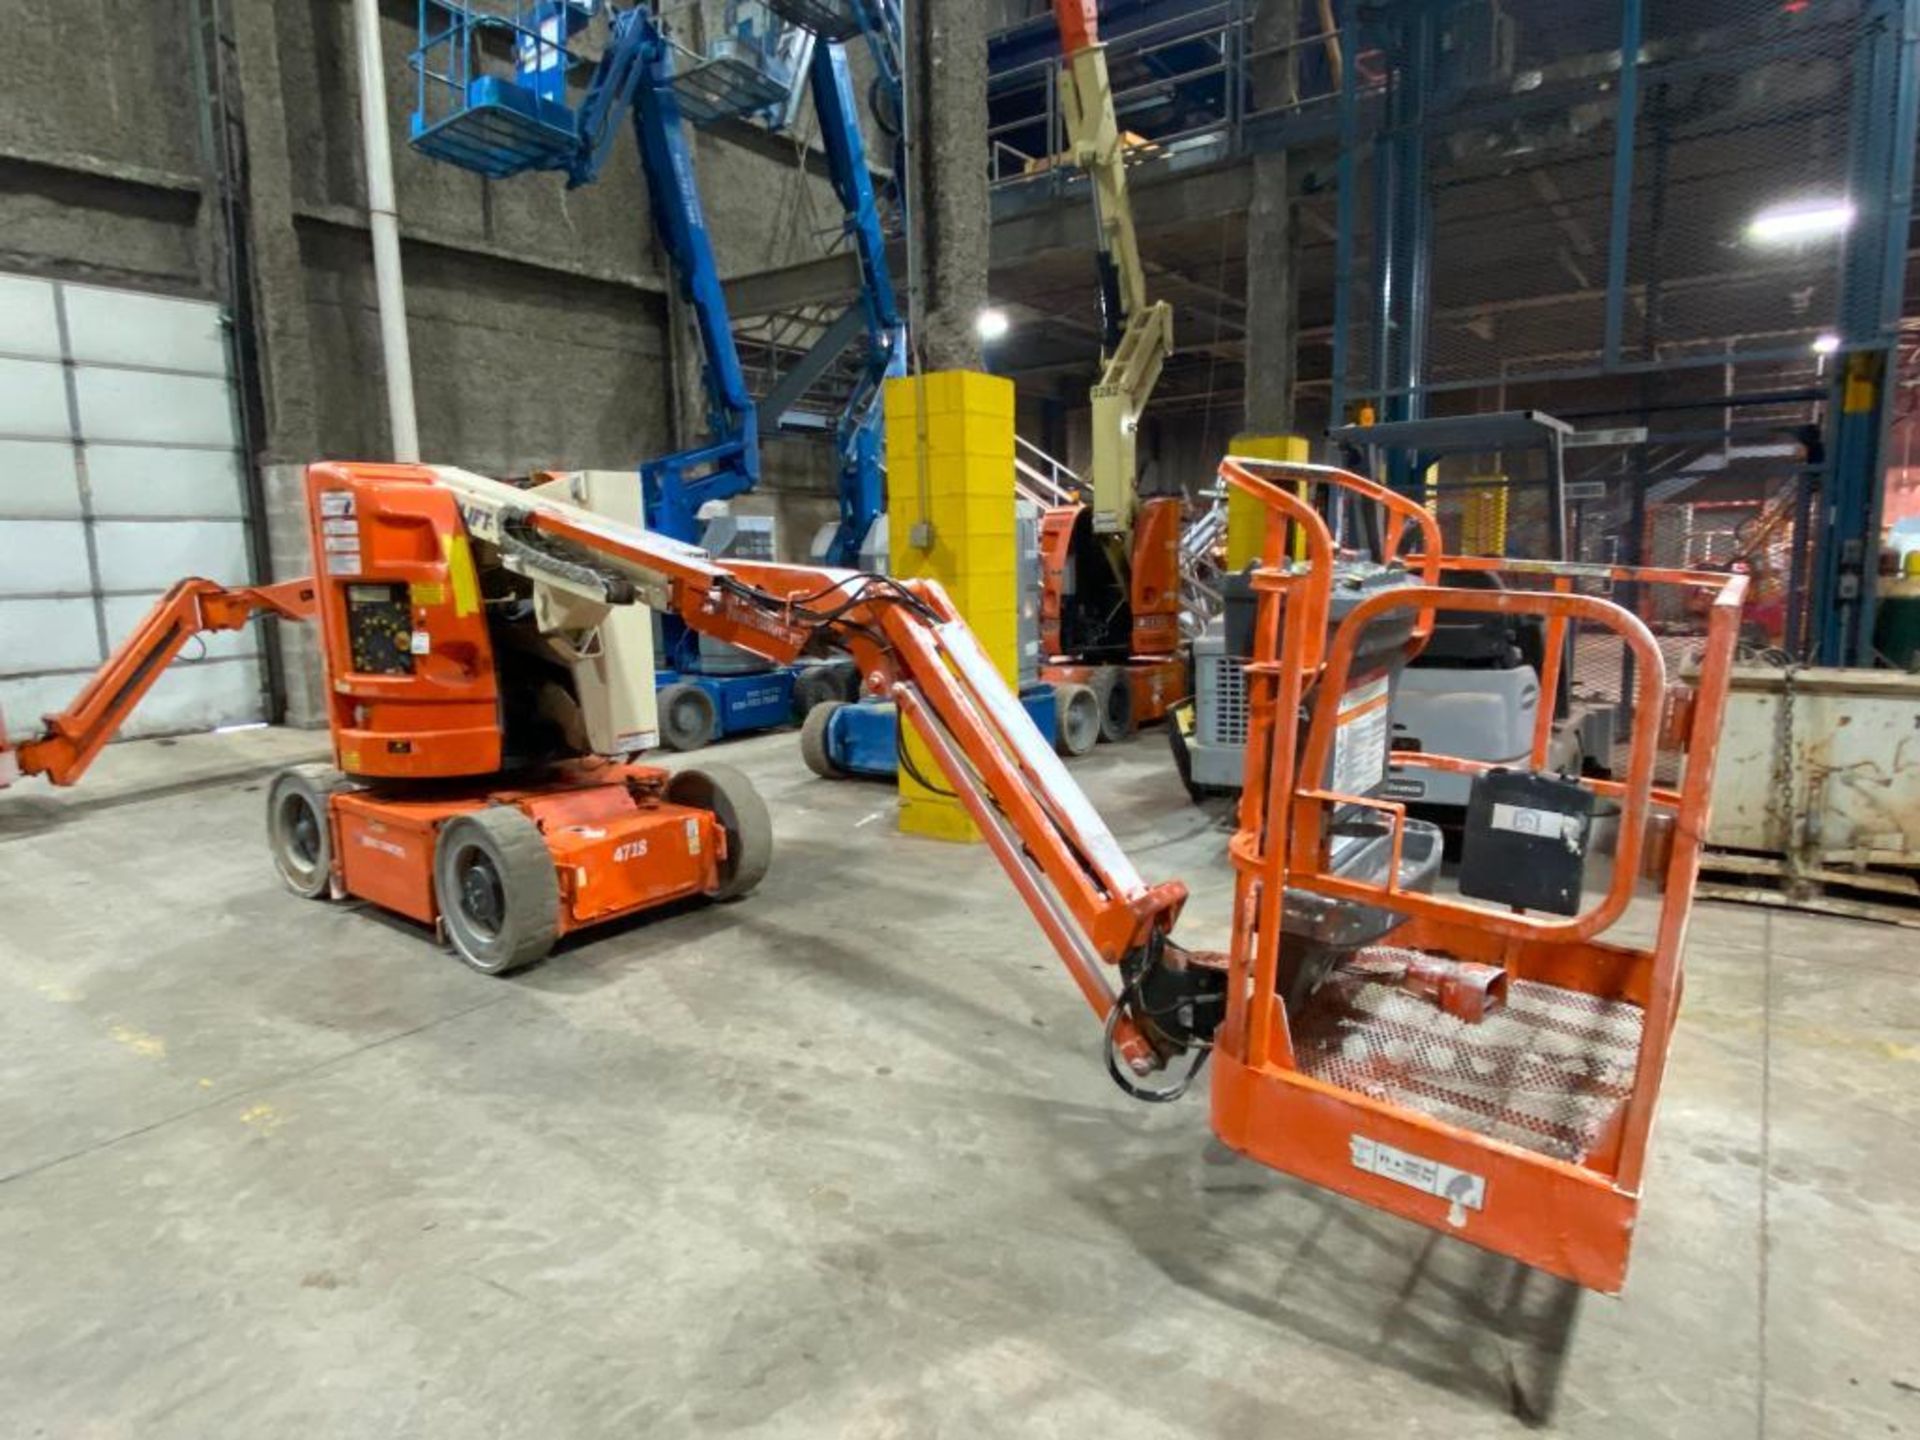 JLG E300AJP Articulating Boom Lift (S/N 300124789, Year 2008), with 29'5" Platform Height, 30" x 48"